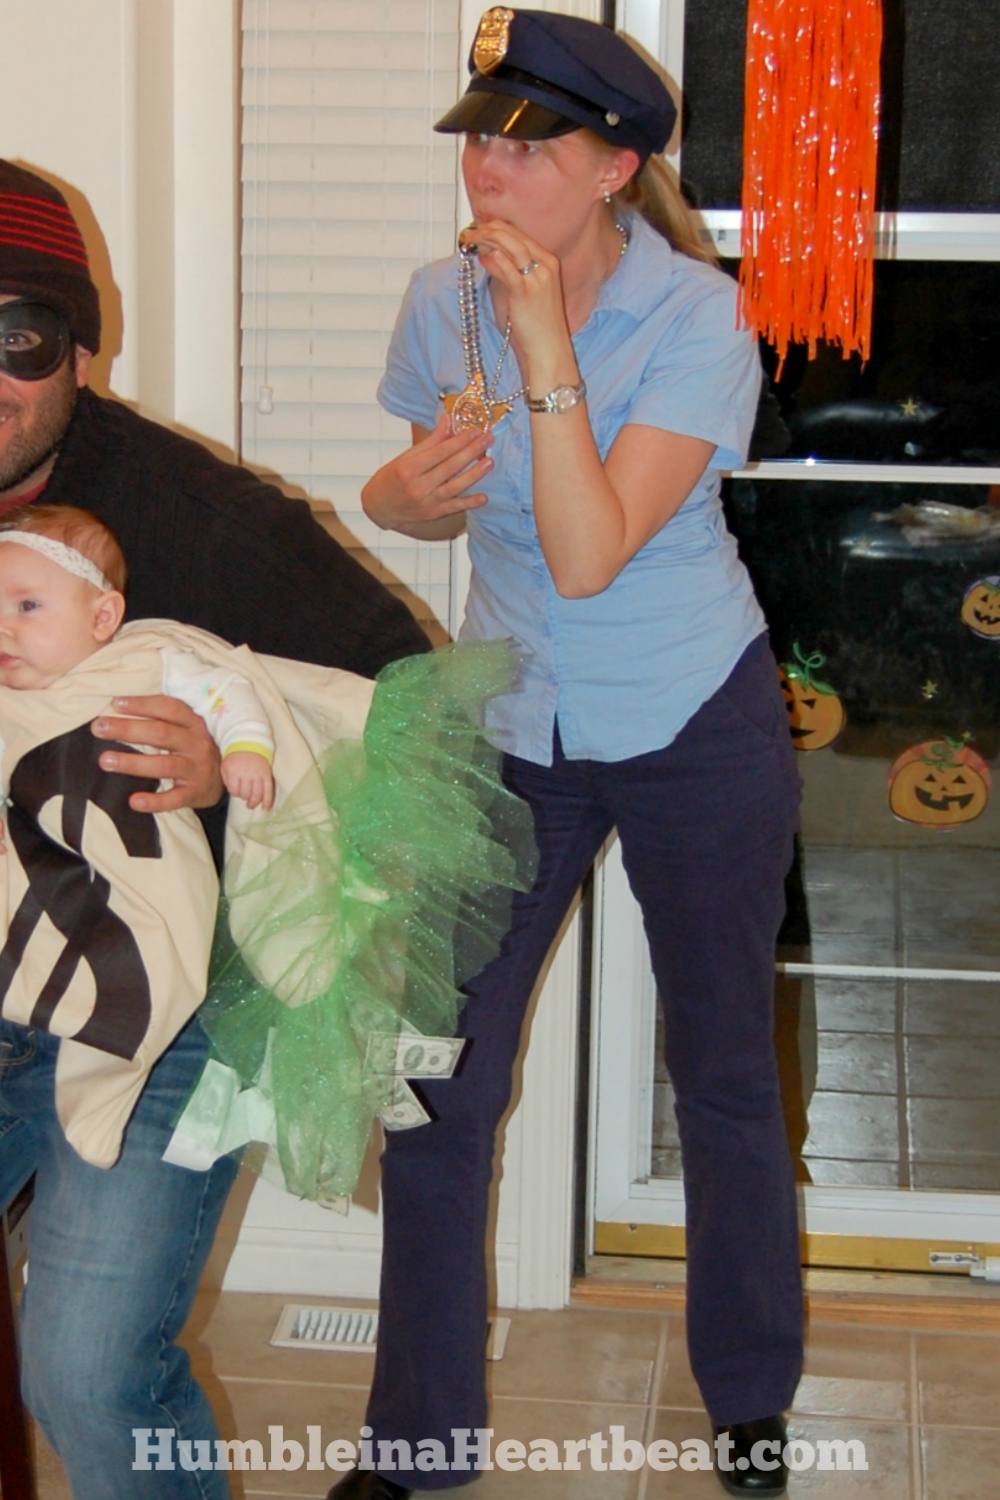 Need a Halloween costume idea for your new little family? If you have a baby younger than about 5 months, this group costume would work well and be lots of fun!